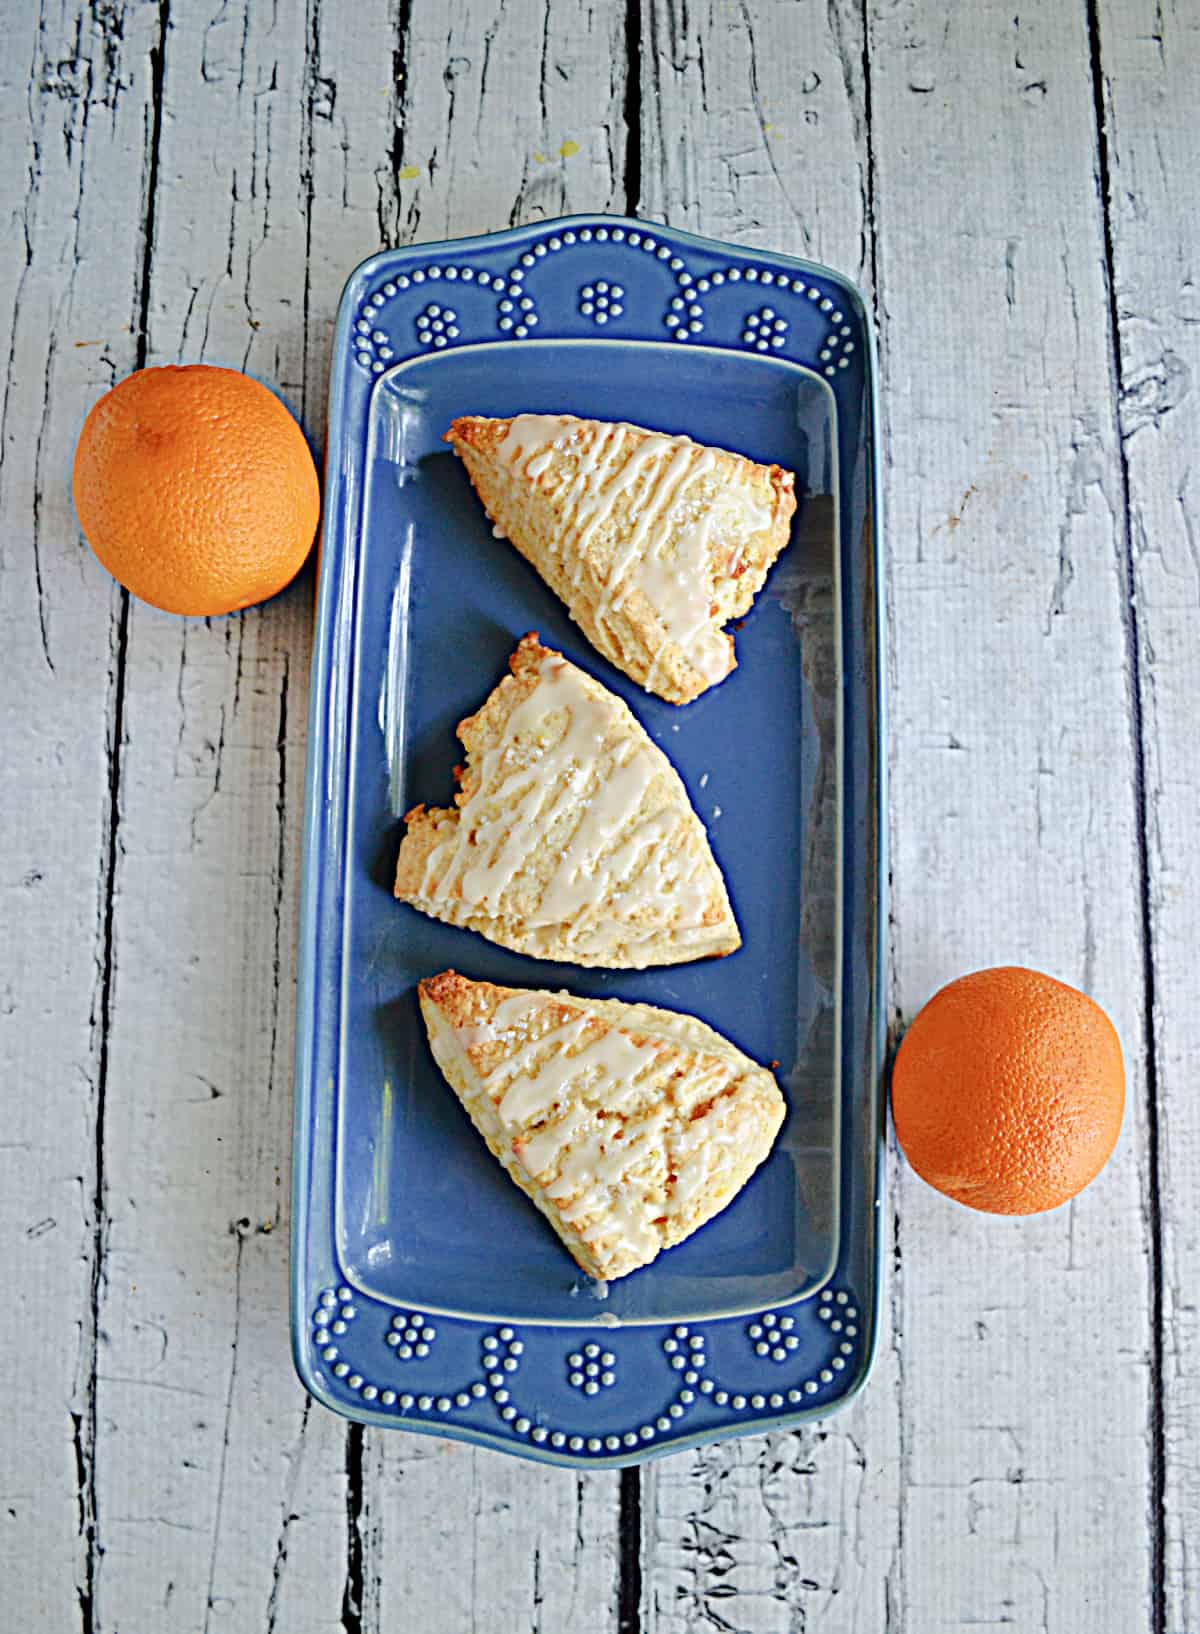 A platter of scones and oranges.